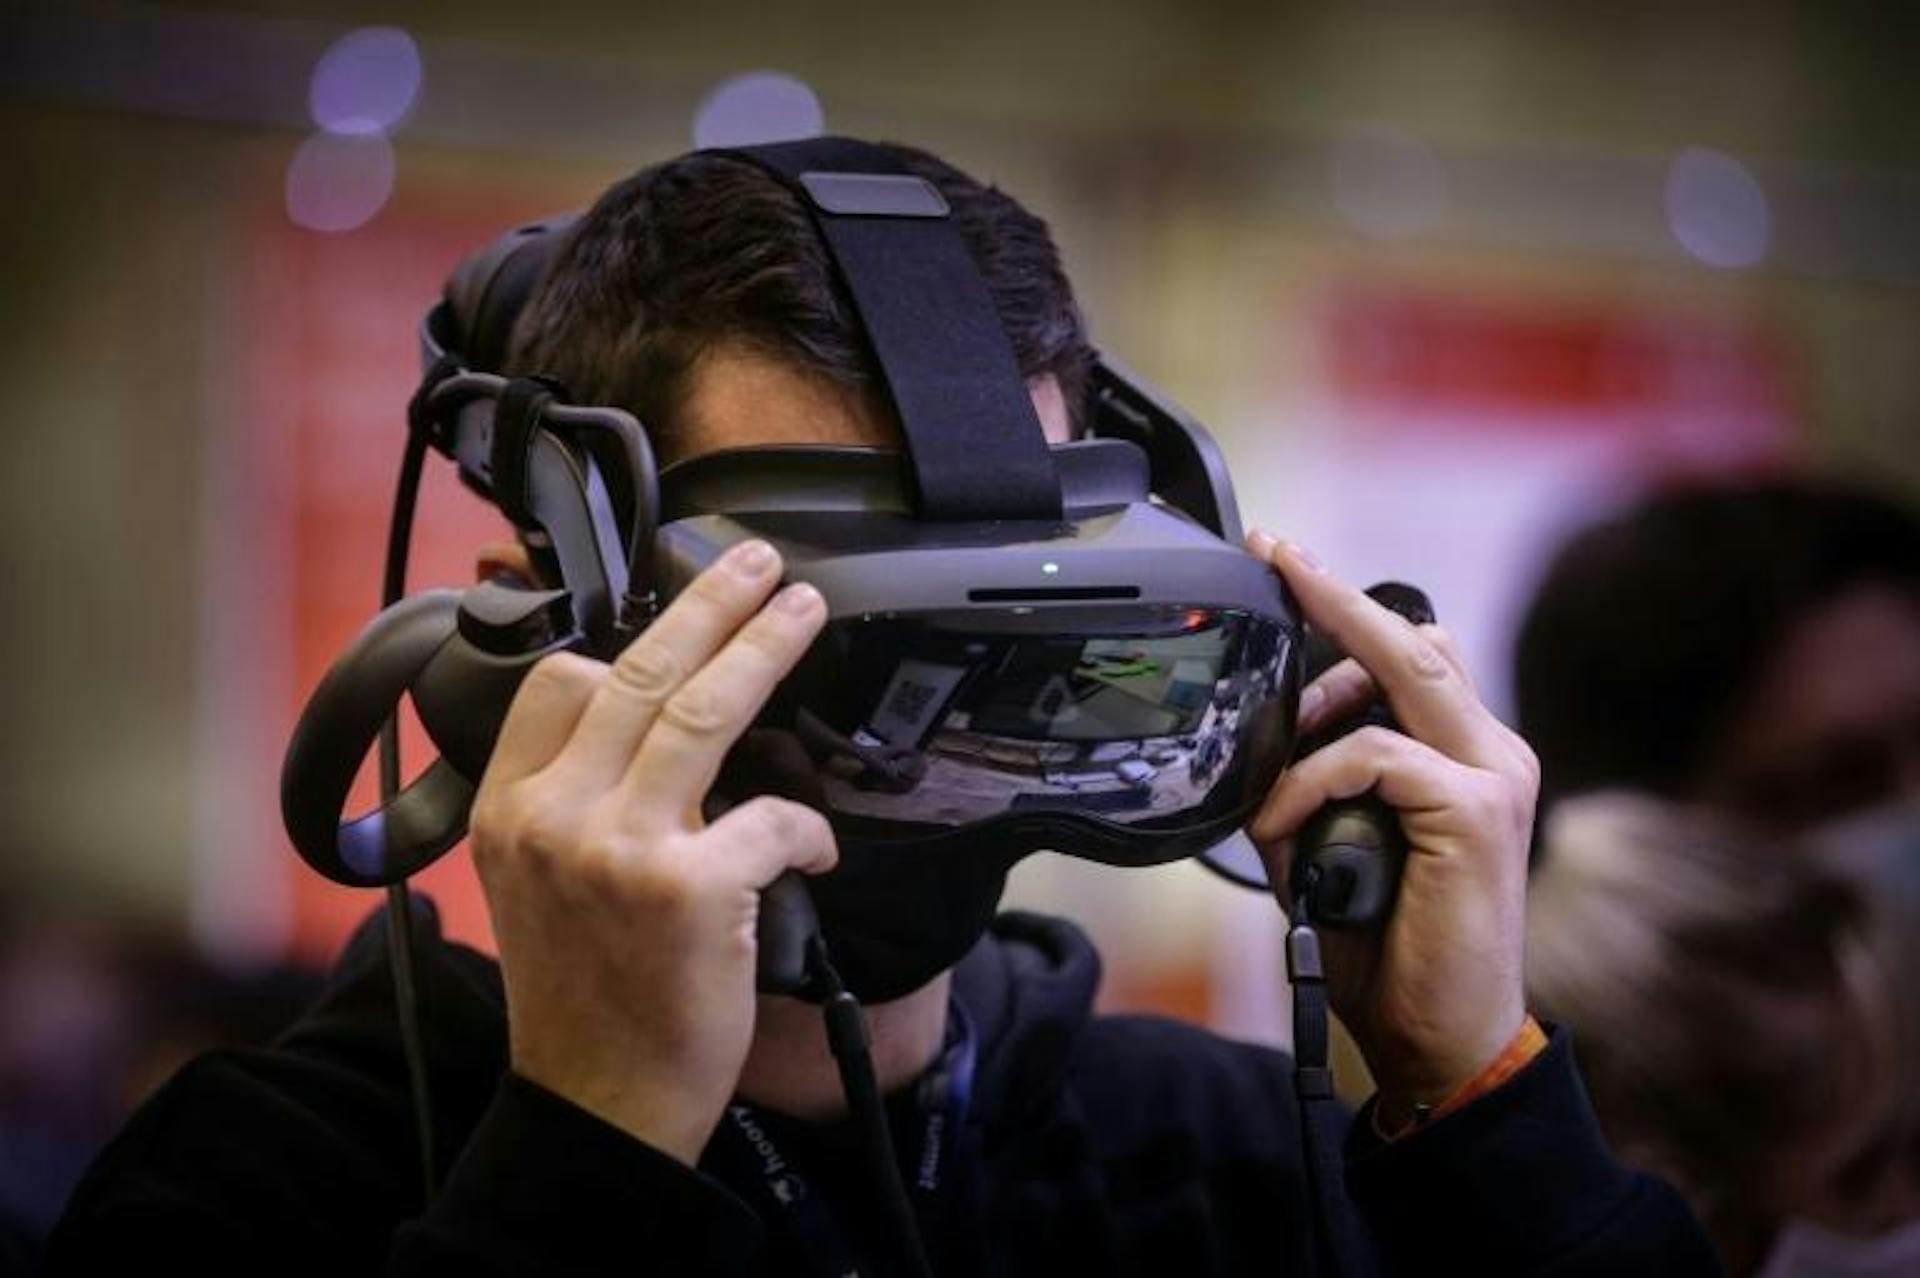 Enthusiasts say the metaverse would eventually allow online experiences, like meeting a friend, to feel face-to-face thanks to virtual reality headsets  Photo: AFP / CARLOS COSTA